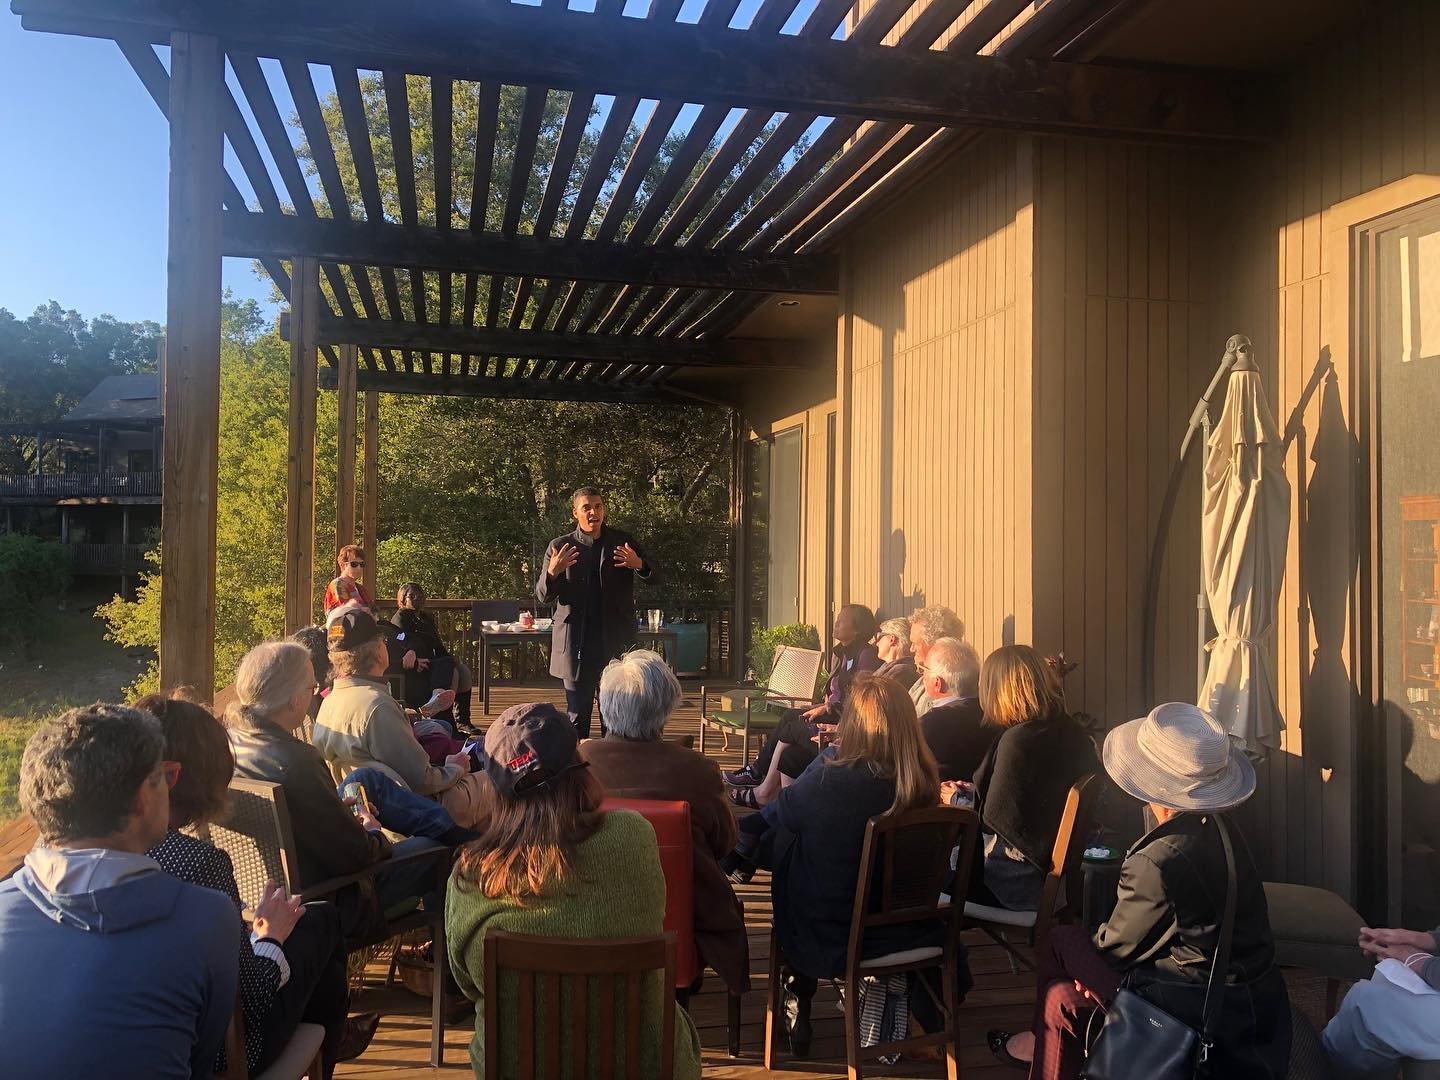 Beautiful night in Portola Valley! Hosts had never organized a pol event, but lent a hand after hearing climate action is my #1 priority. We can transition to 100% clean and renewable energy and foster the talent and innovation of Silicon Valley to a